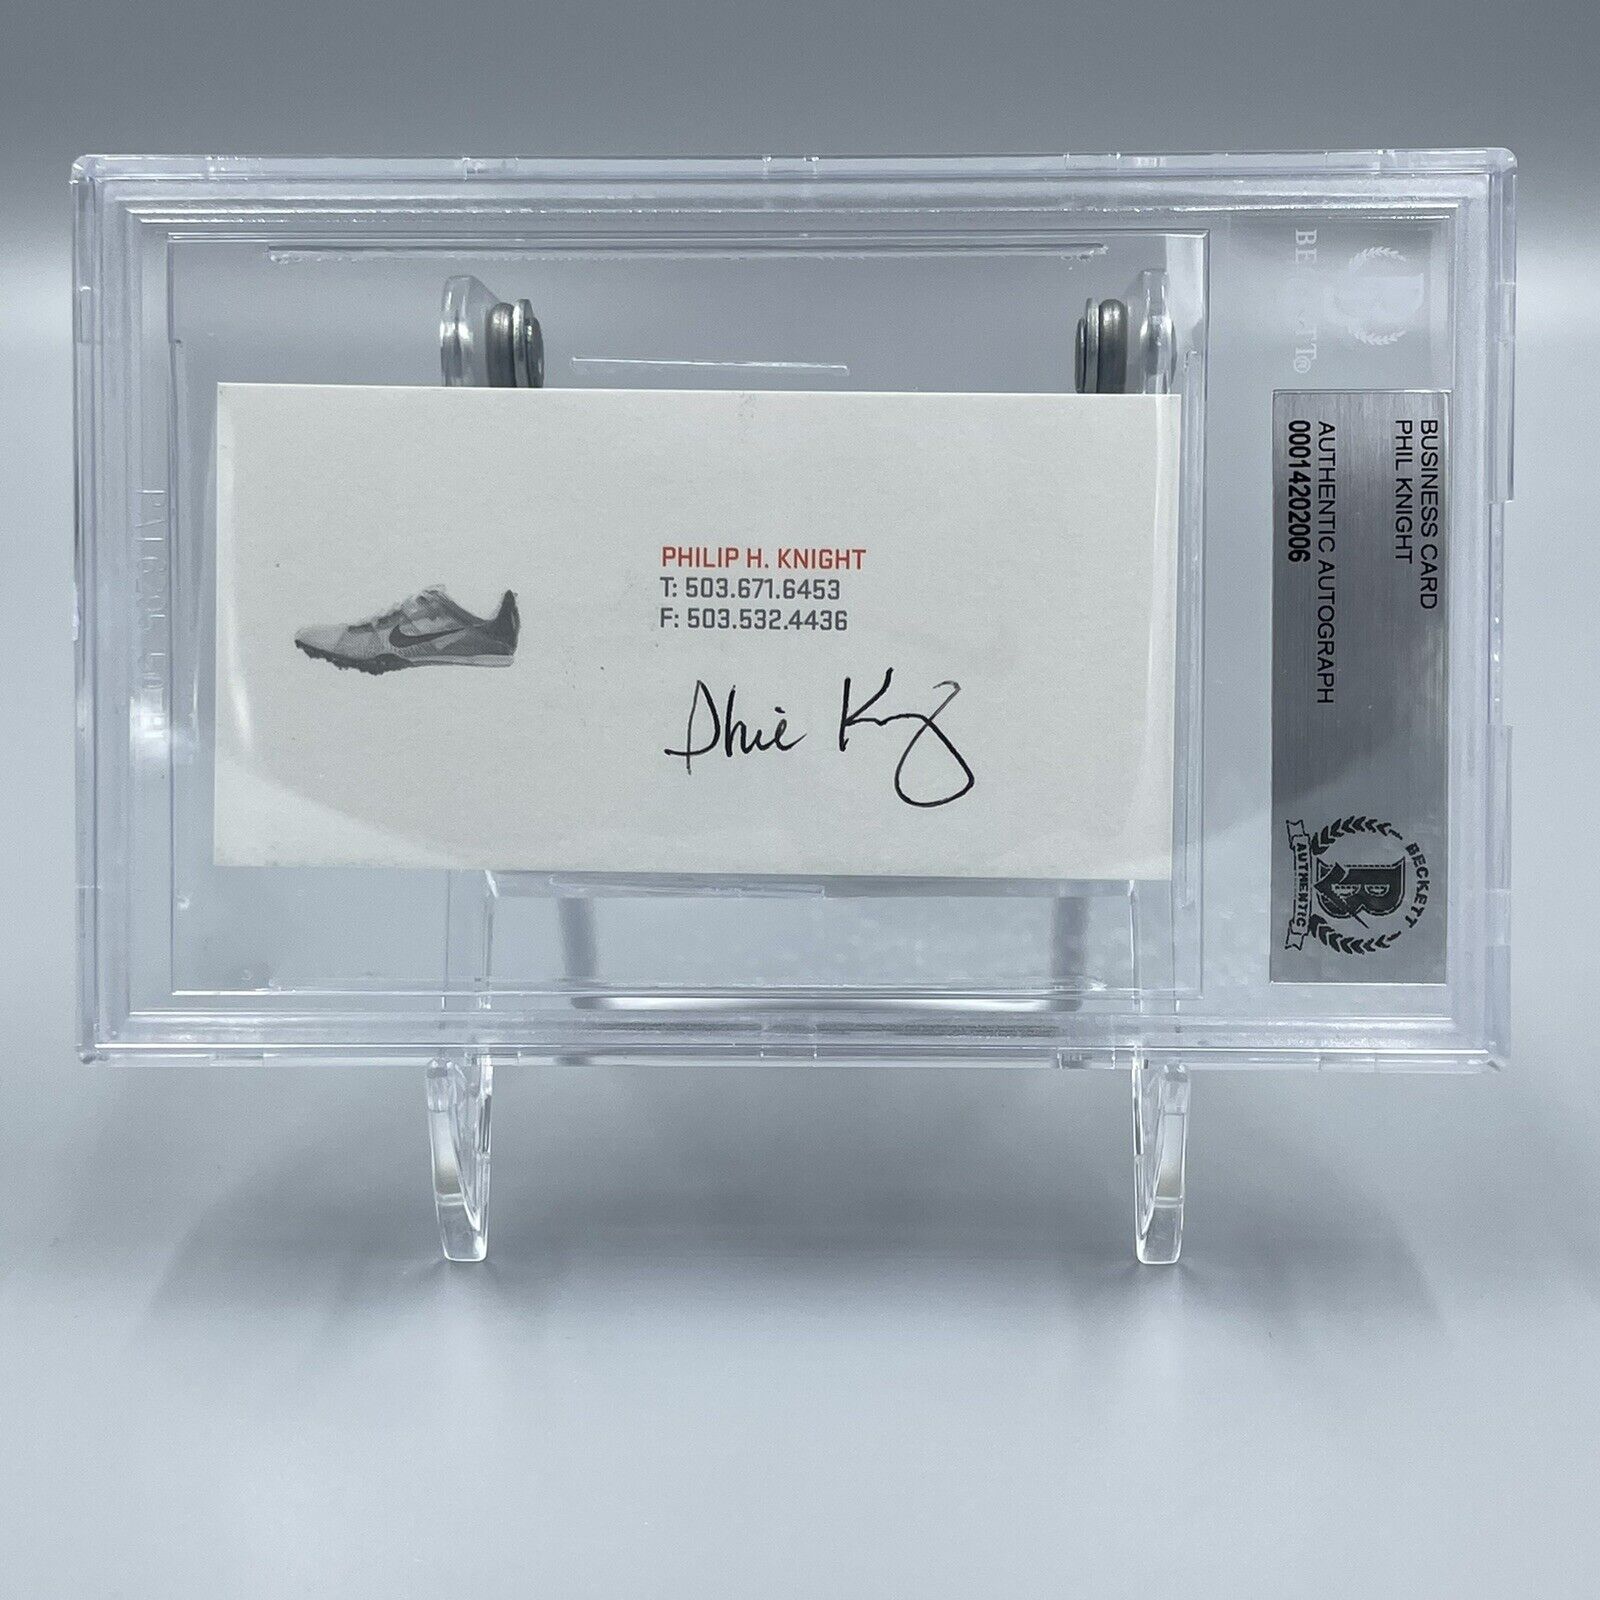 Phil Knight Signed Autographed Nike Business Card Beckett BAS